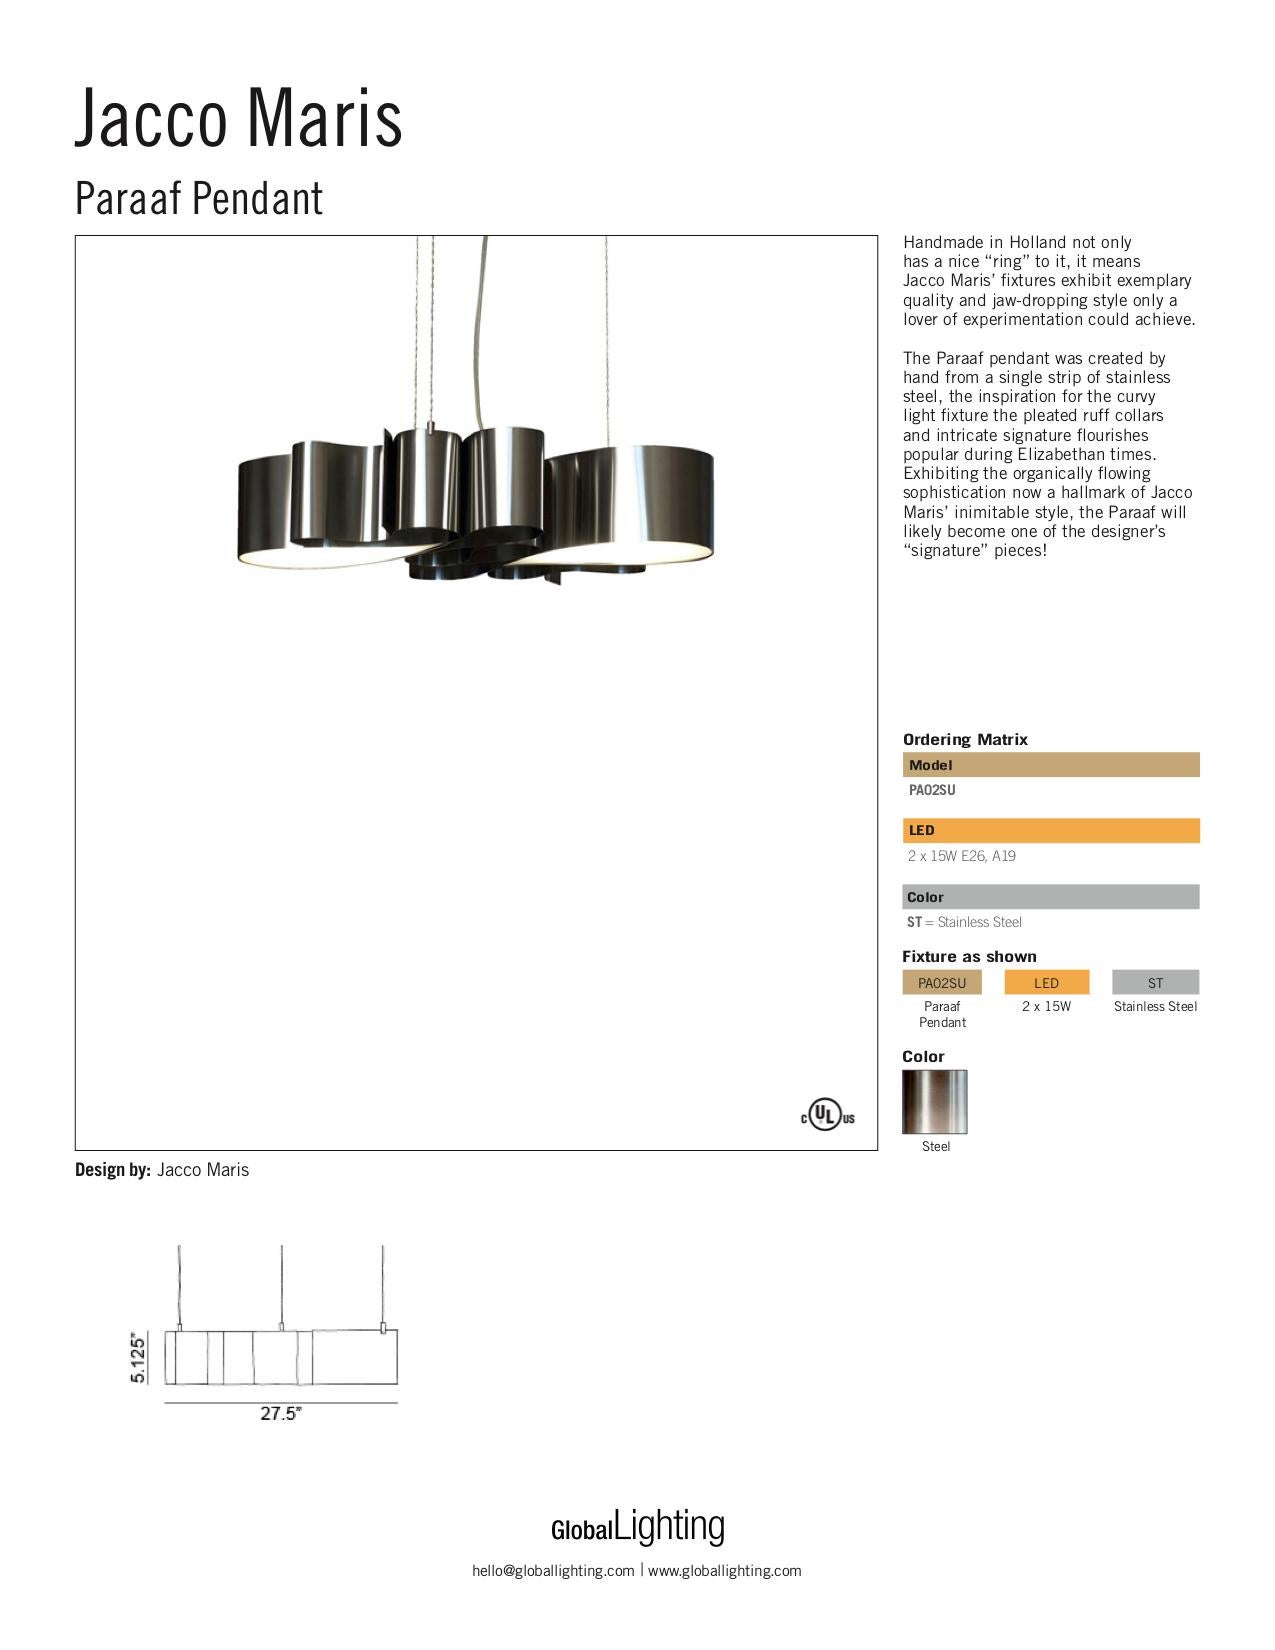 Contemporary Jacco Maris Paraaf Pendant in Stainless Steel For Sale